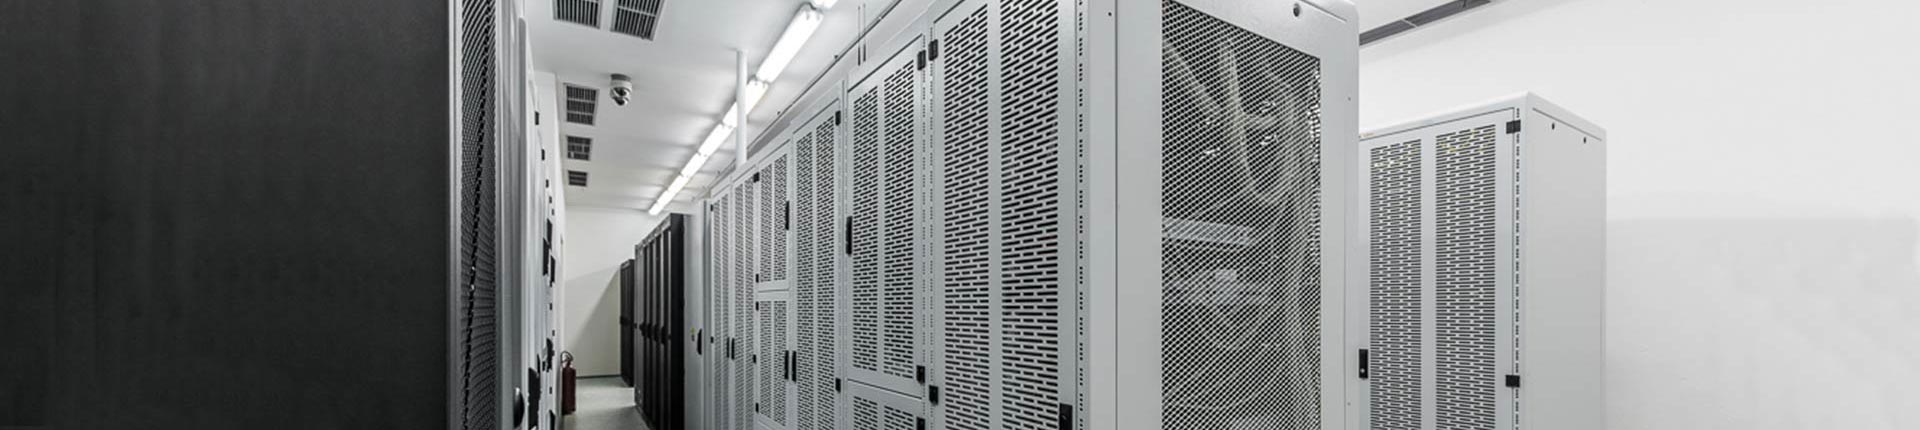 Data center and its server room